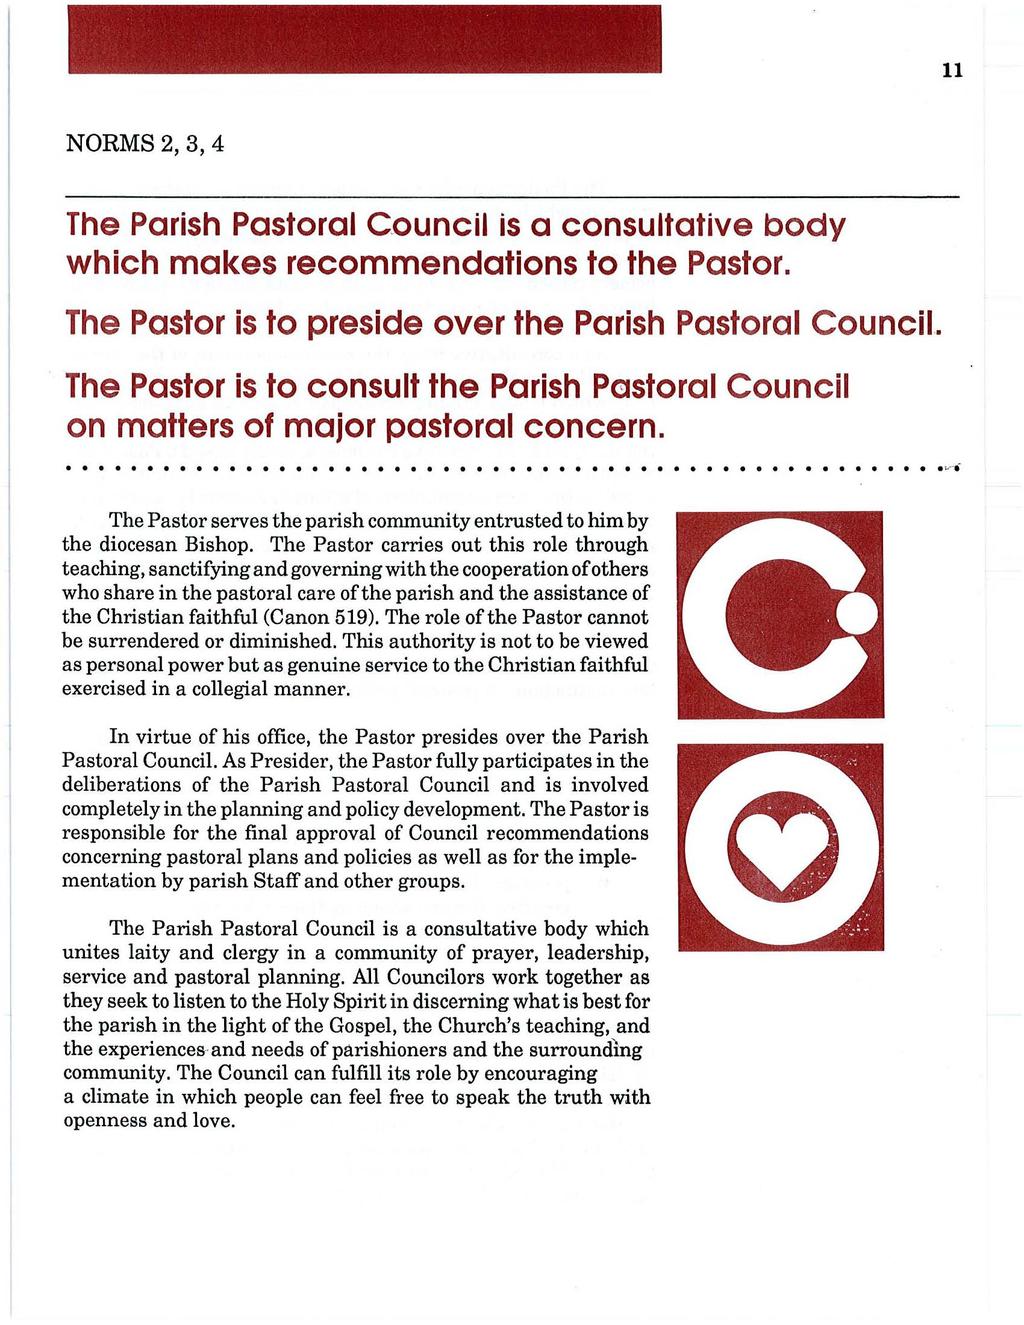 11 NORMS 2,3,4 The Parish Pastoral C.ouncil is a consultative body which makes recommendations to the Pastor. The Pastor is to preside over the Parish Pastoral Council.